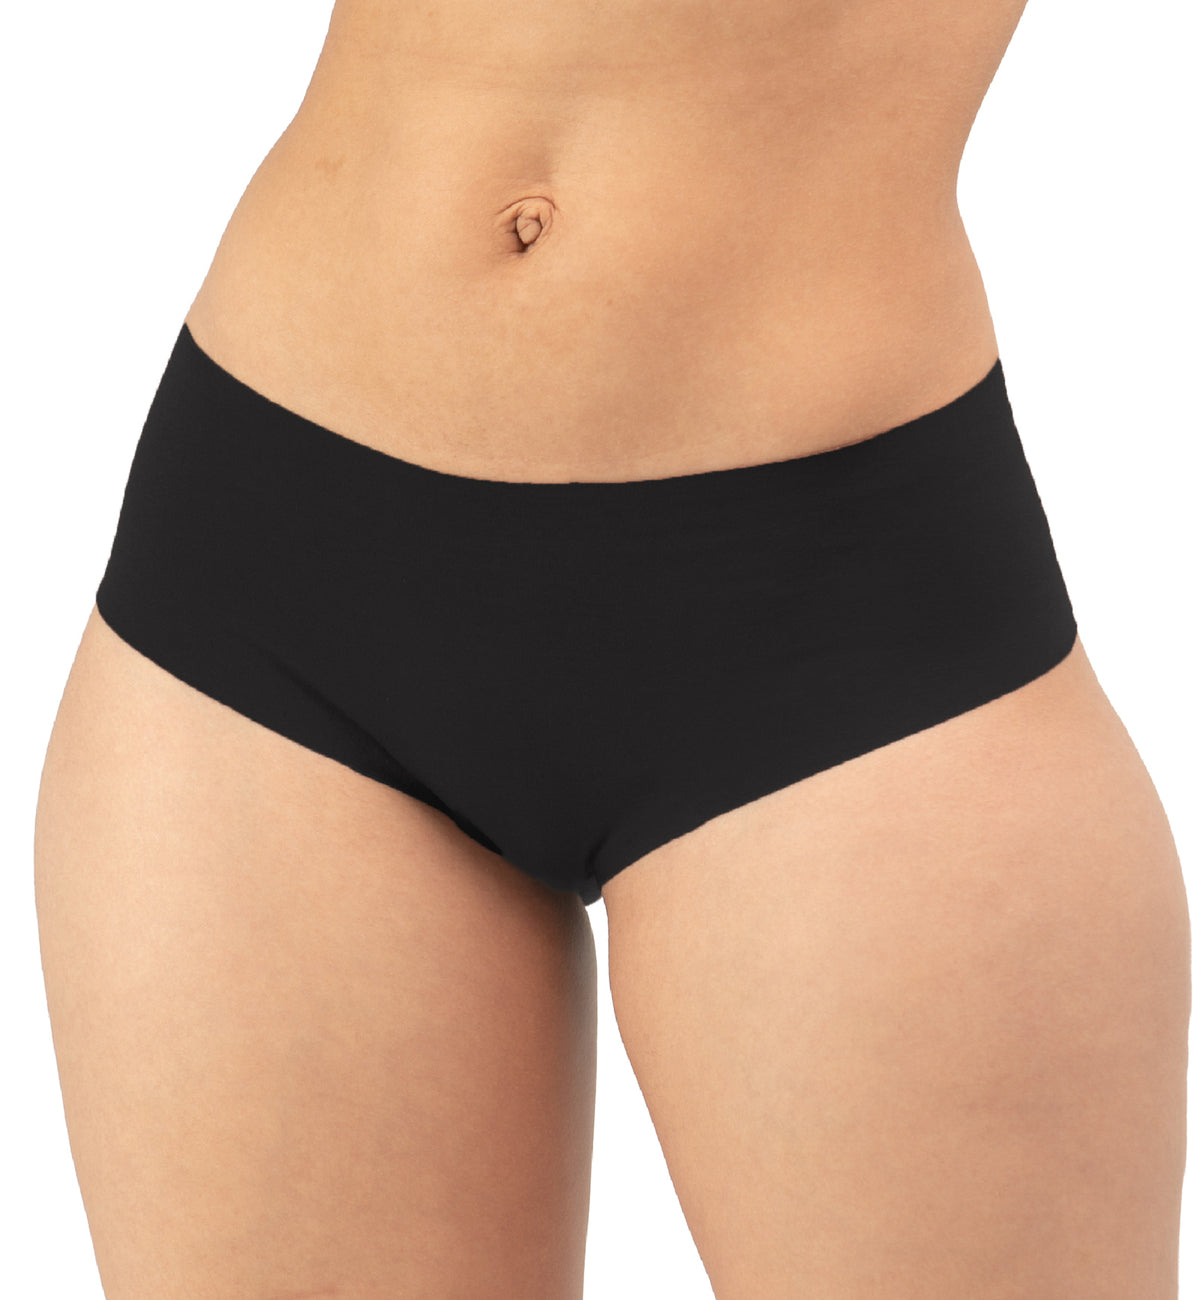 Panty Promise Low Rise Hipster,XS,Black - Black,XS